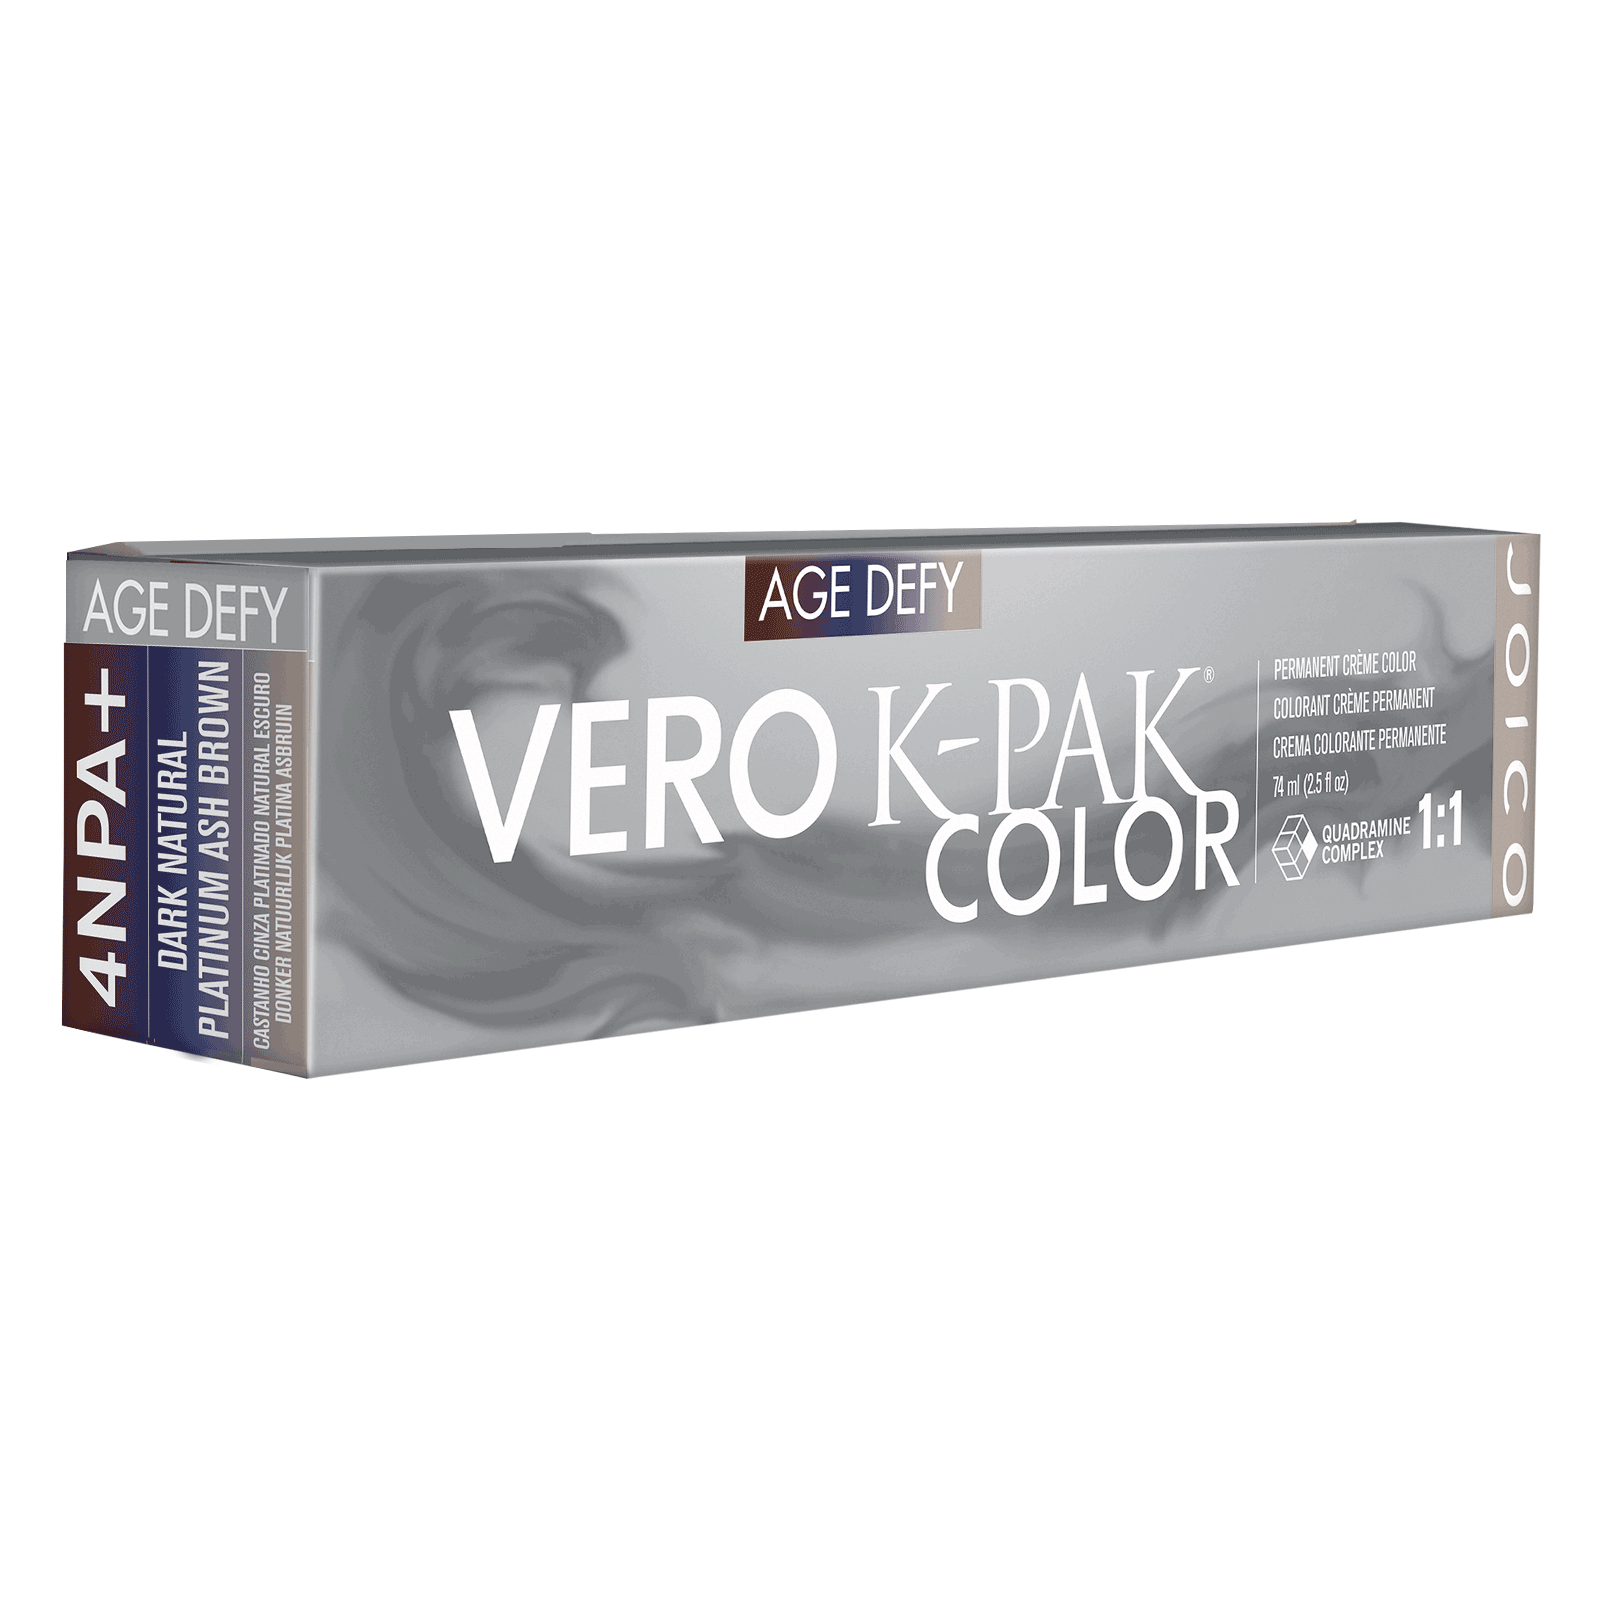 Joico Color Chart Age Defy